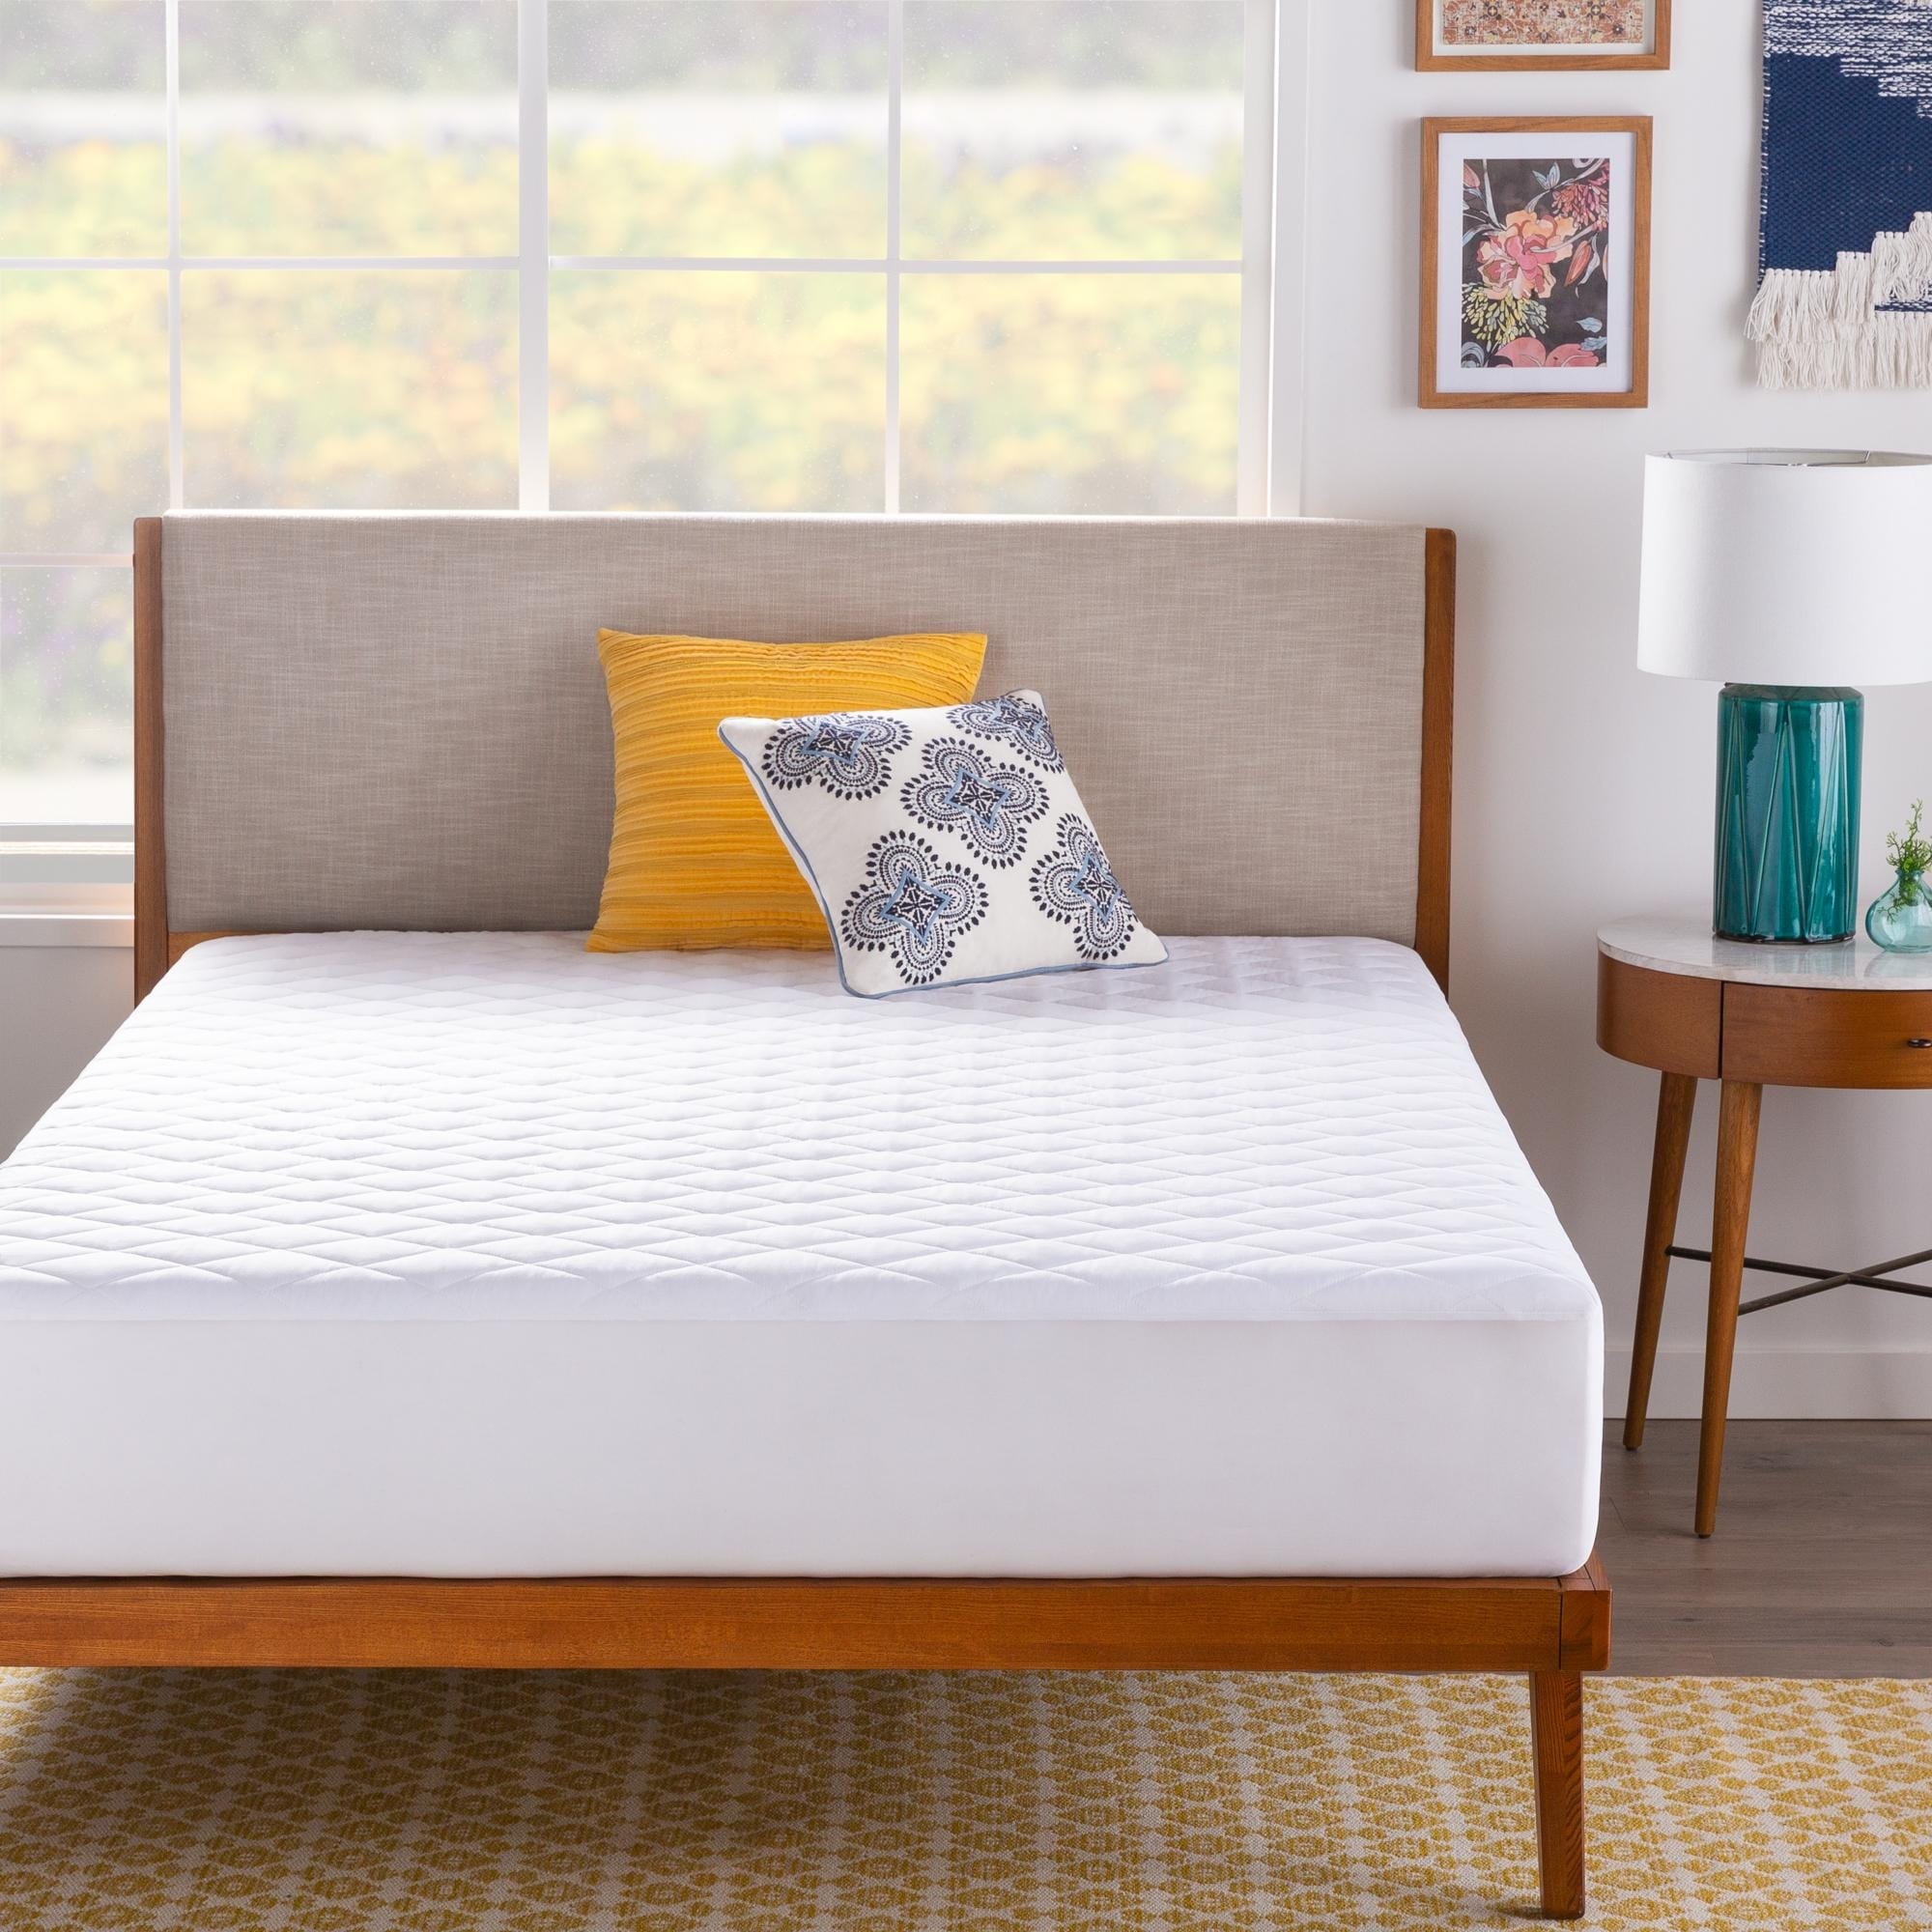 https://ak1.ostkcdn.com/images/products/is/images/direct/06071f996f4beff323f339d1a2a1945db66ede9b/Linenspa-Essentials-Quilted-Mattress-Pad.jpg